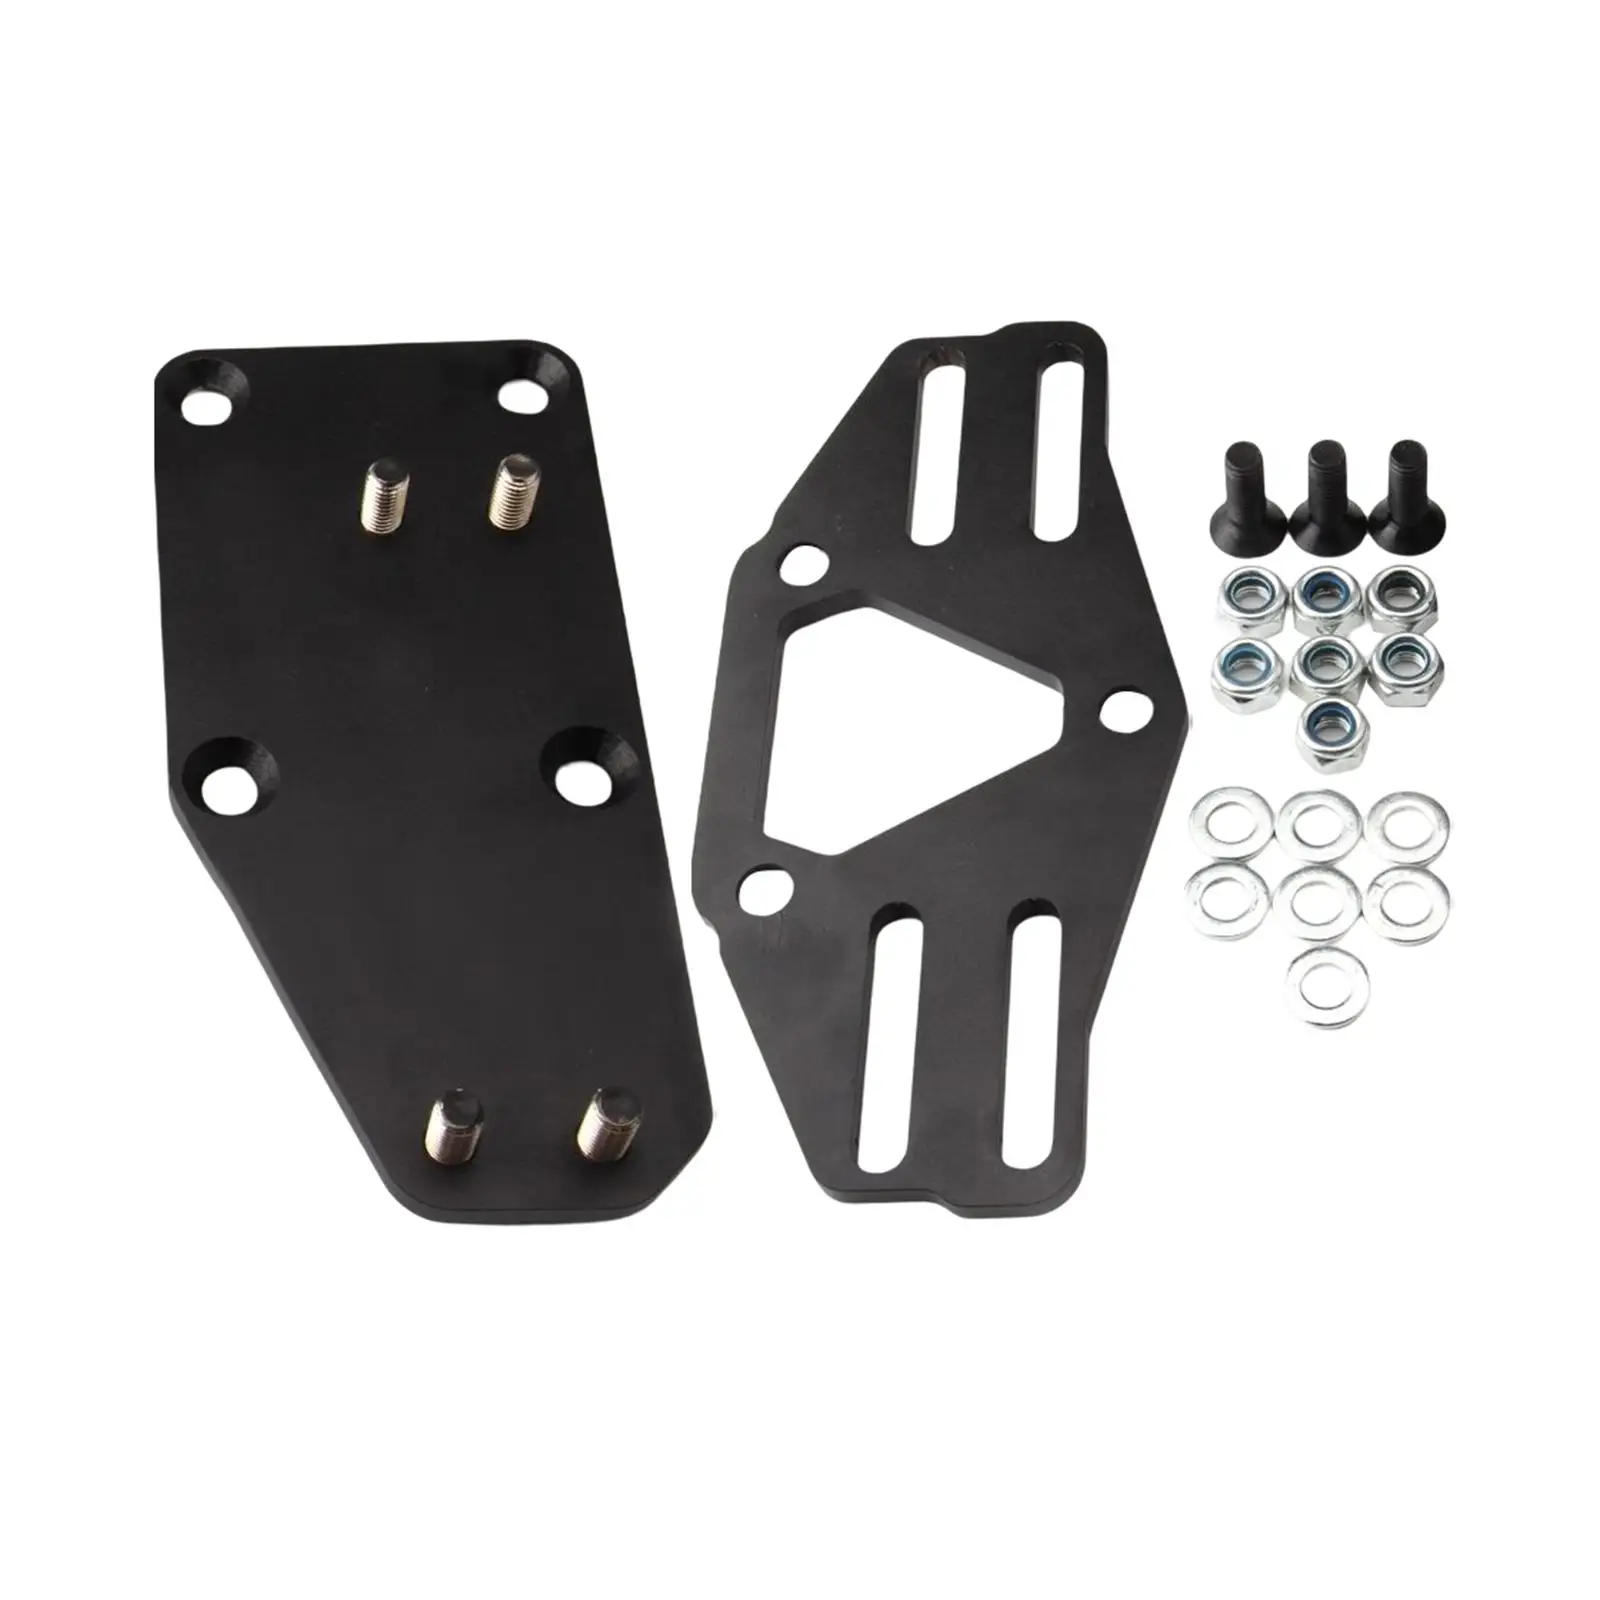 Engine Mount Adapter Swap Motor Mount Adapter Plate Fit for LS Cars & Trucks 58-72 Plates